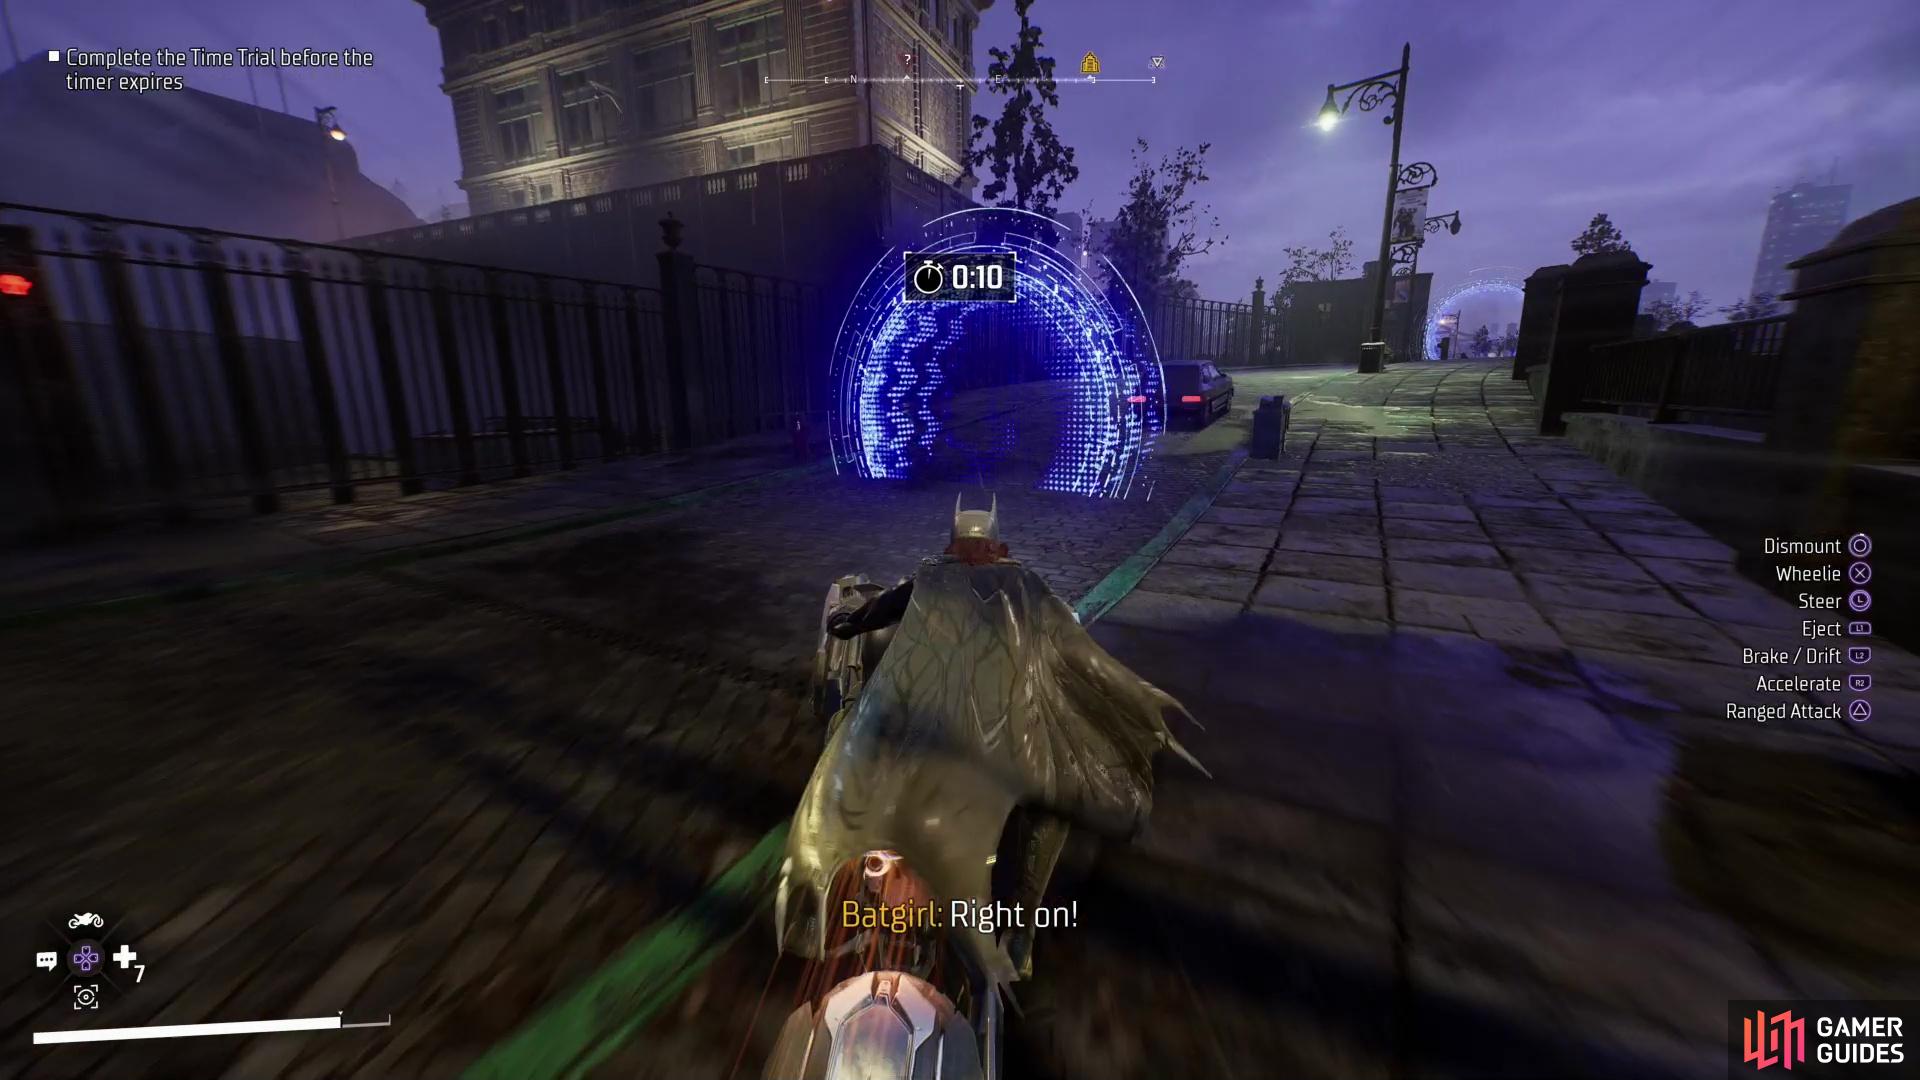 Batcycle Time Trials are one of the few side activities you will be doing